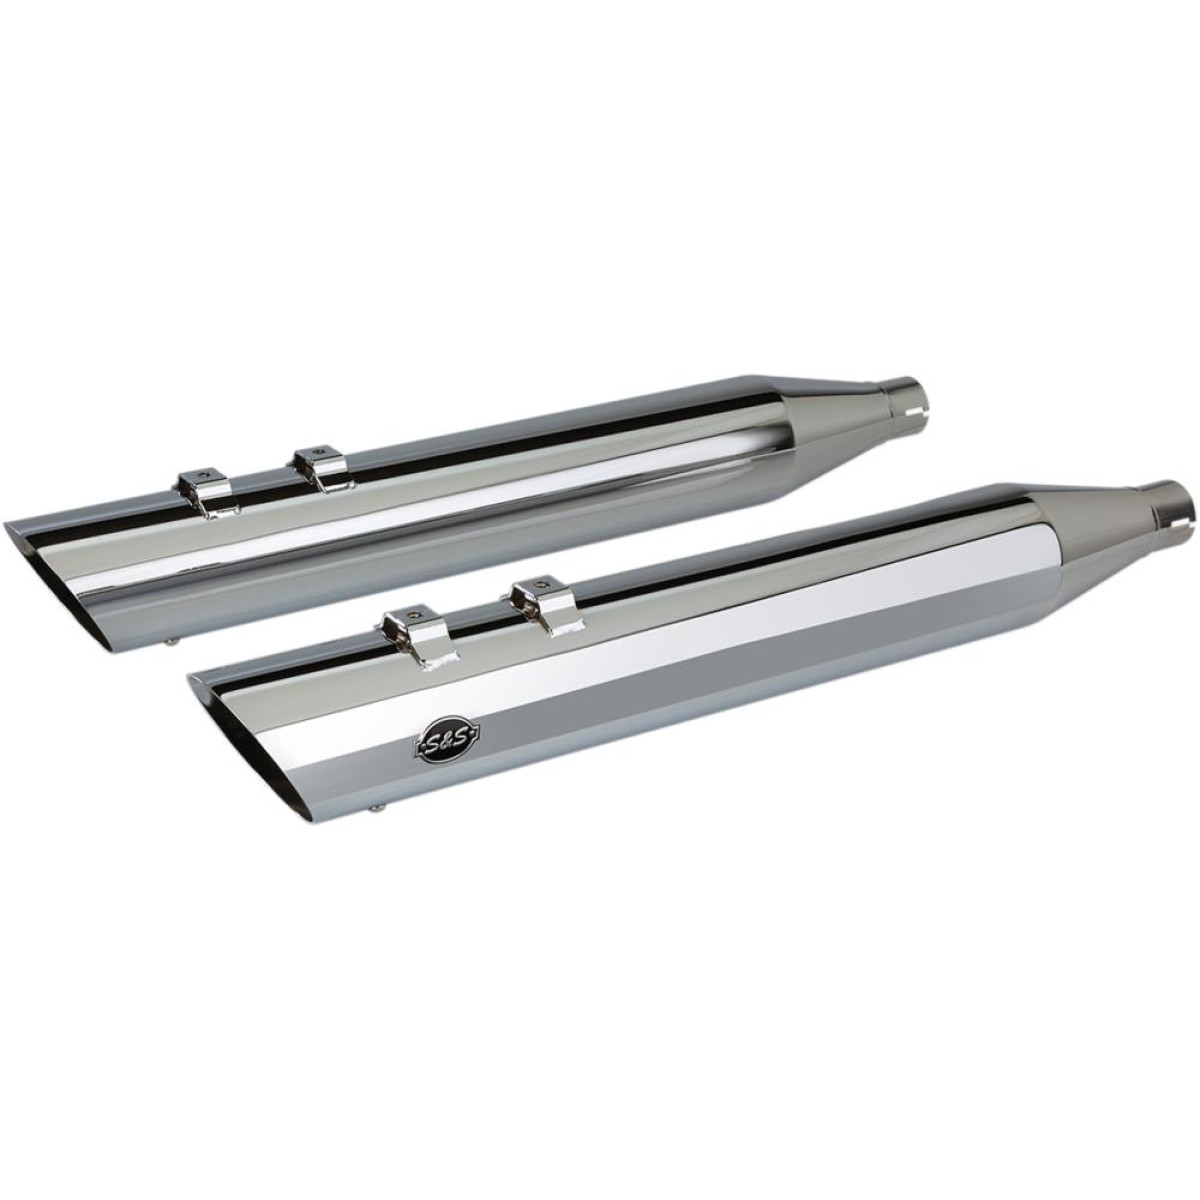 S&S CYCLE Exhaust MUFFER SLIP-ON SLASH CUT END 4" TOURING CHROME - 95-16 HD Touring Models